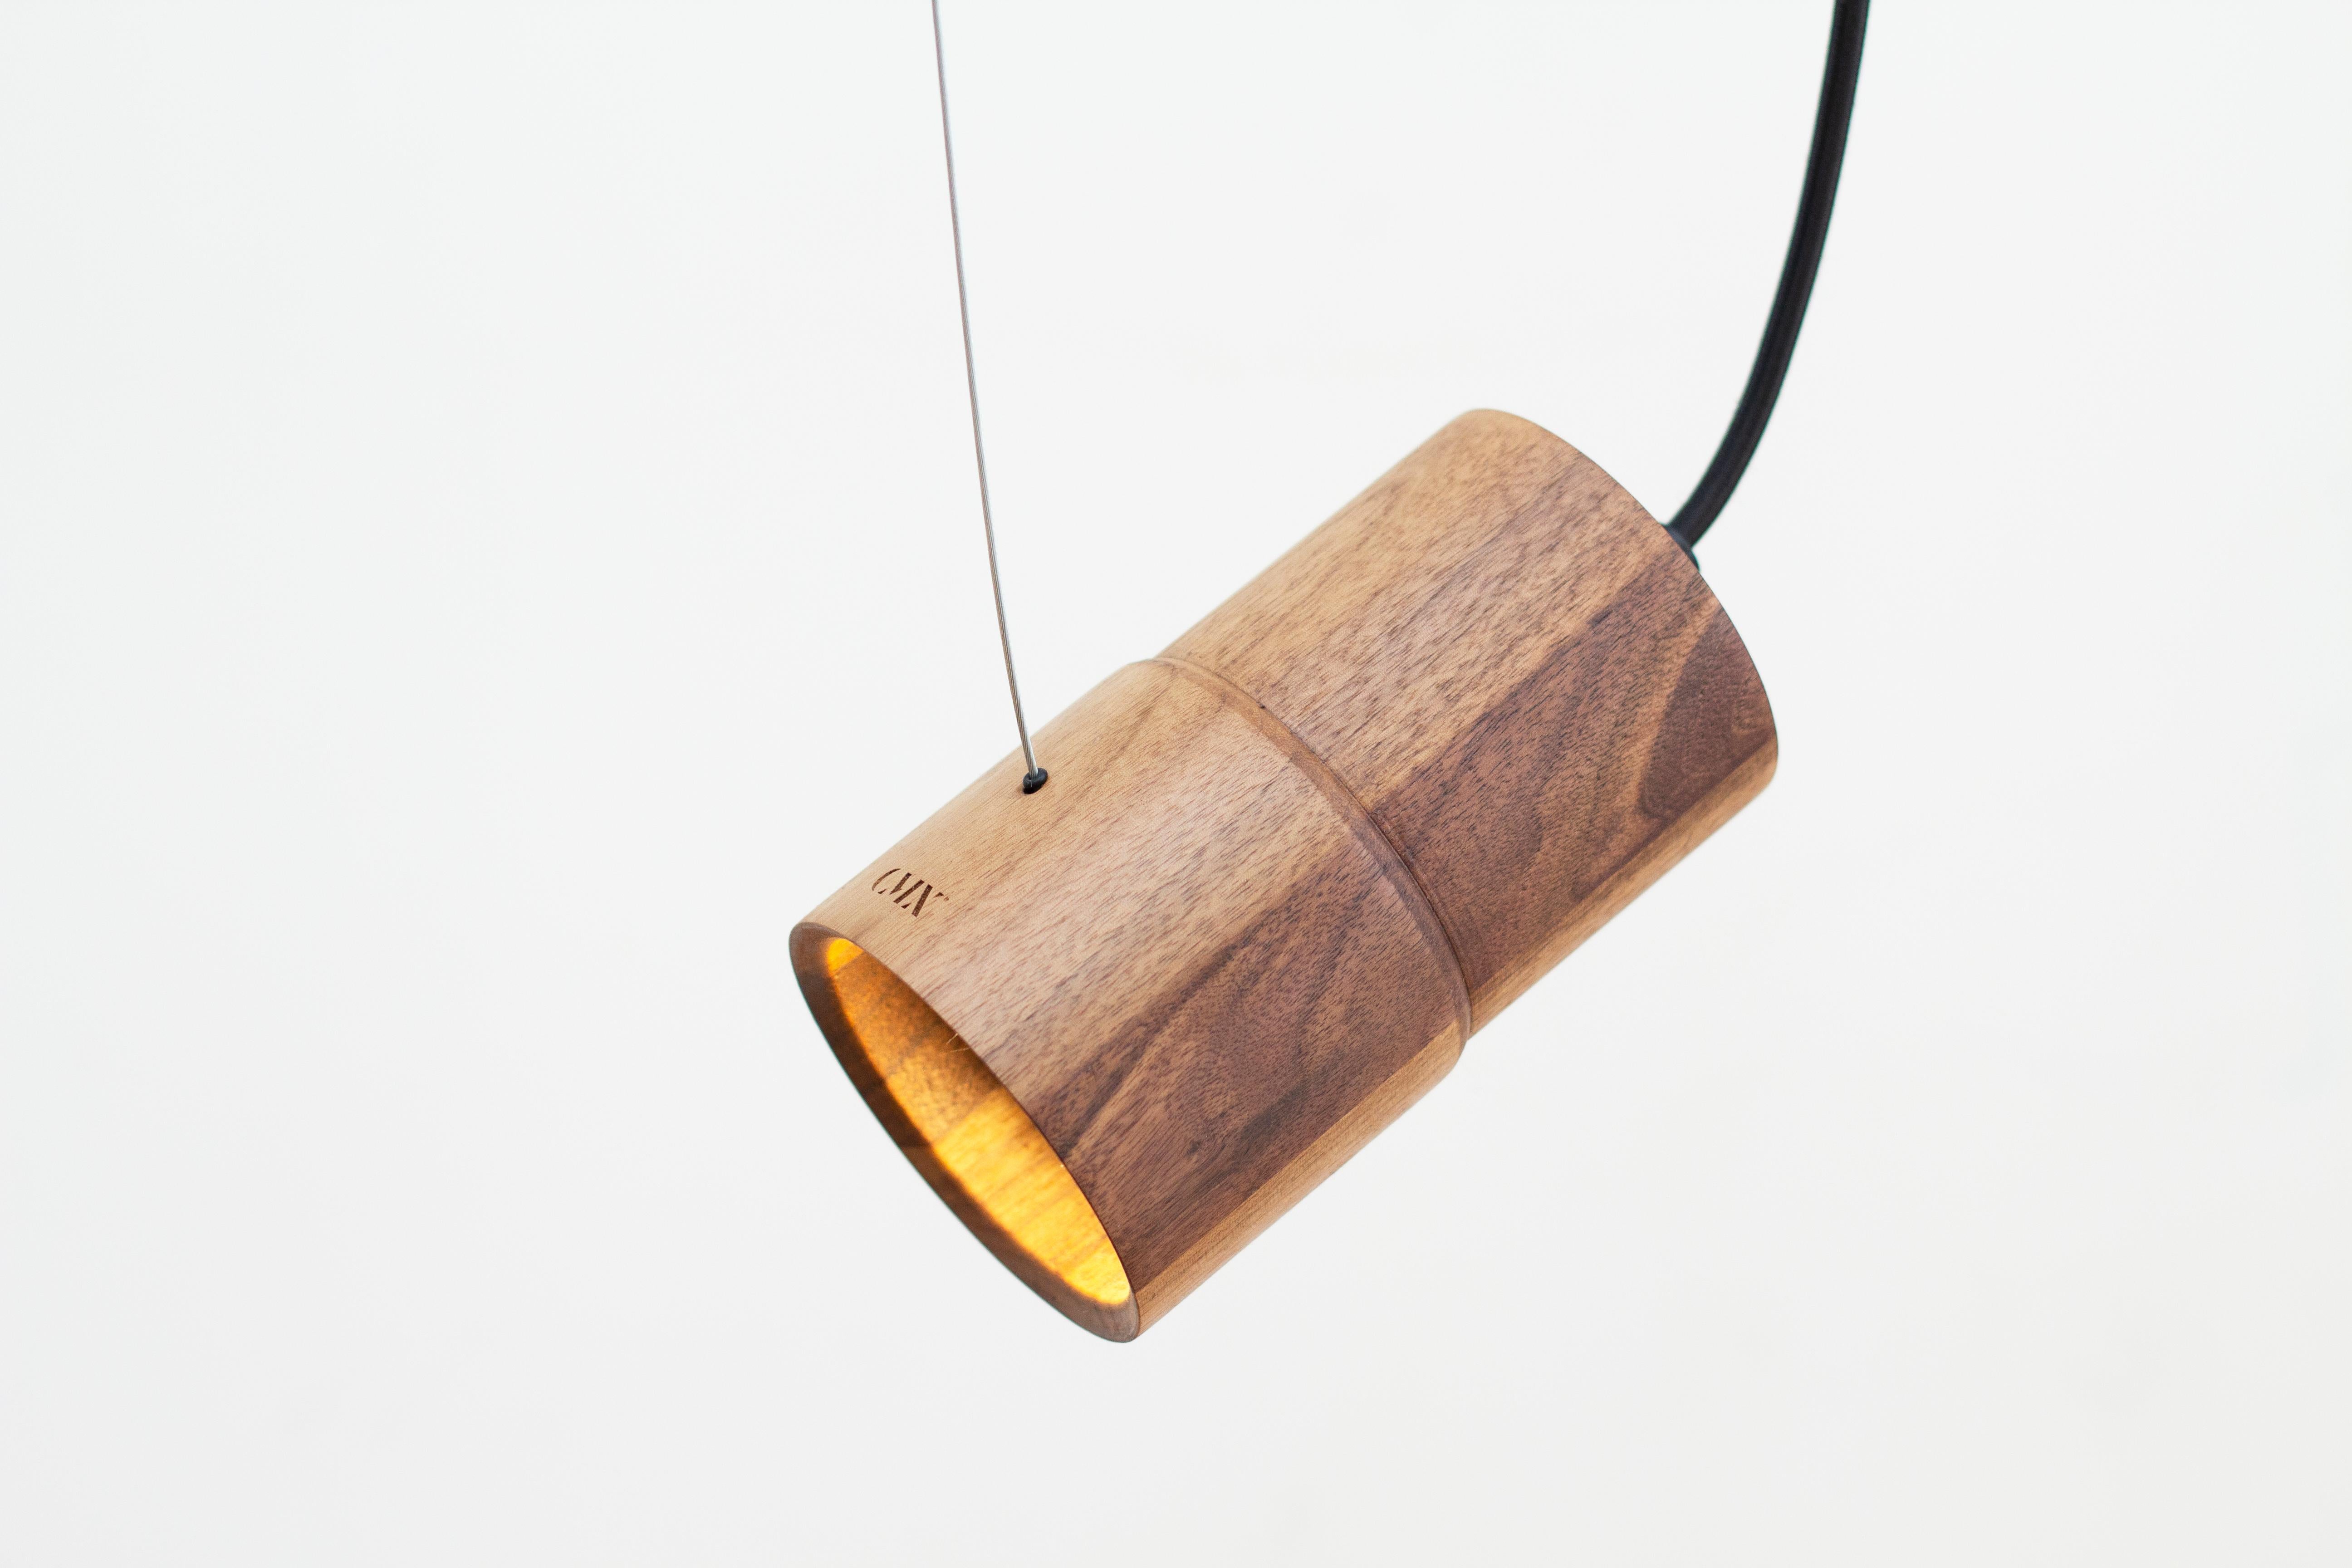 The ZUCC Pendant Lamp is carefully crafted from turned solid wood, highlighting the intrinsic natural beauty of the material. Its design embraces a natural aesthetic that adds warmth and sophistication to any indoor space.